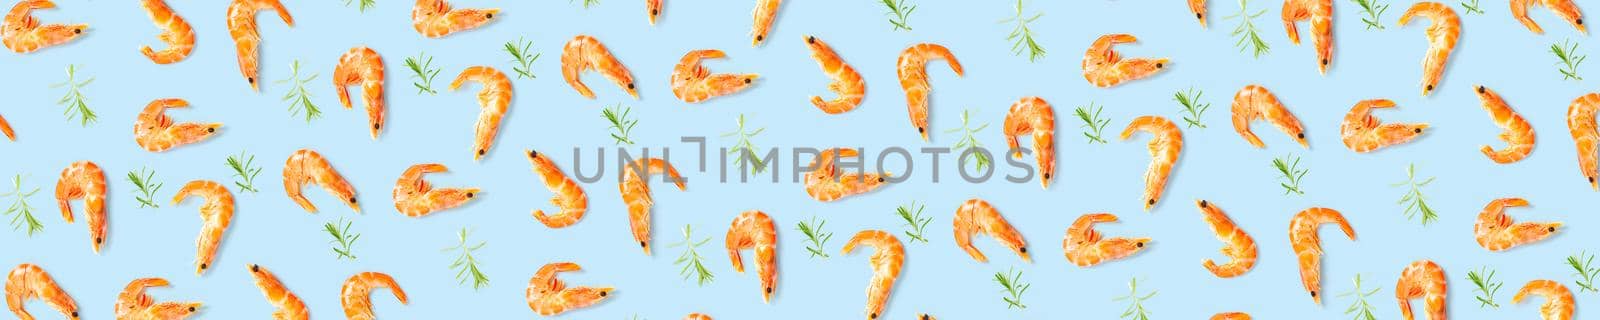 Tiger shrimp. Seafood background made from Prawns isolated on a blue backdrop. modern background from boiled shrimps, Seafood. not seamless pattern by PhotoTime